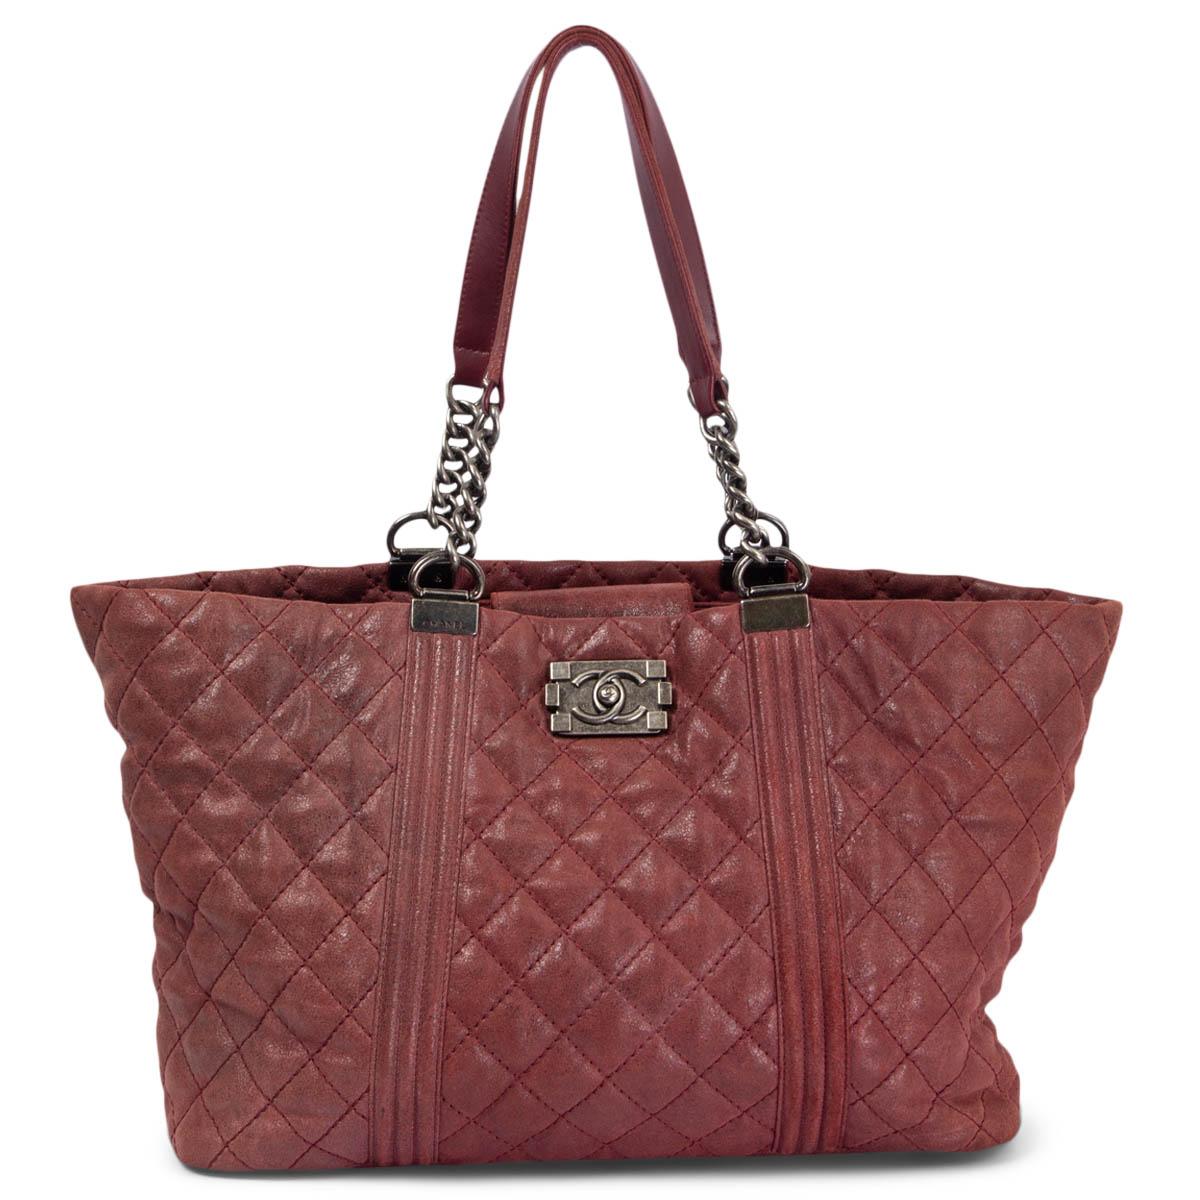 CHANEL burgundy iridescent leather GENTLE BOY Shopping Tote Bag For Sale